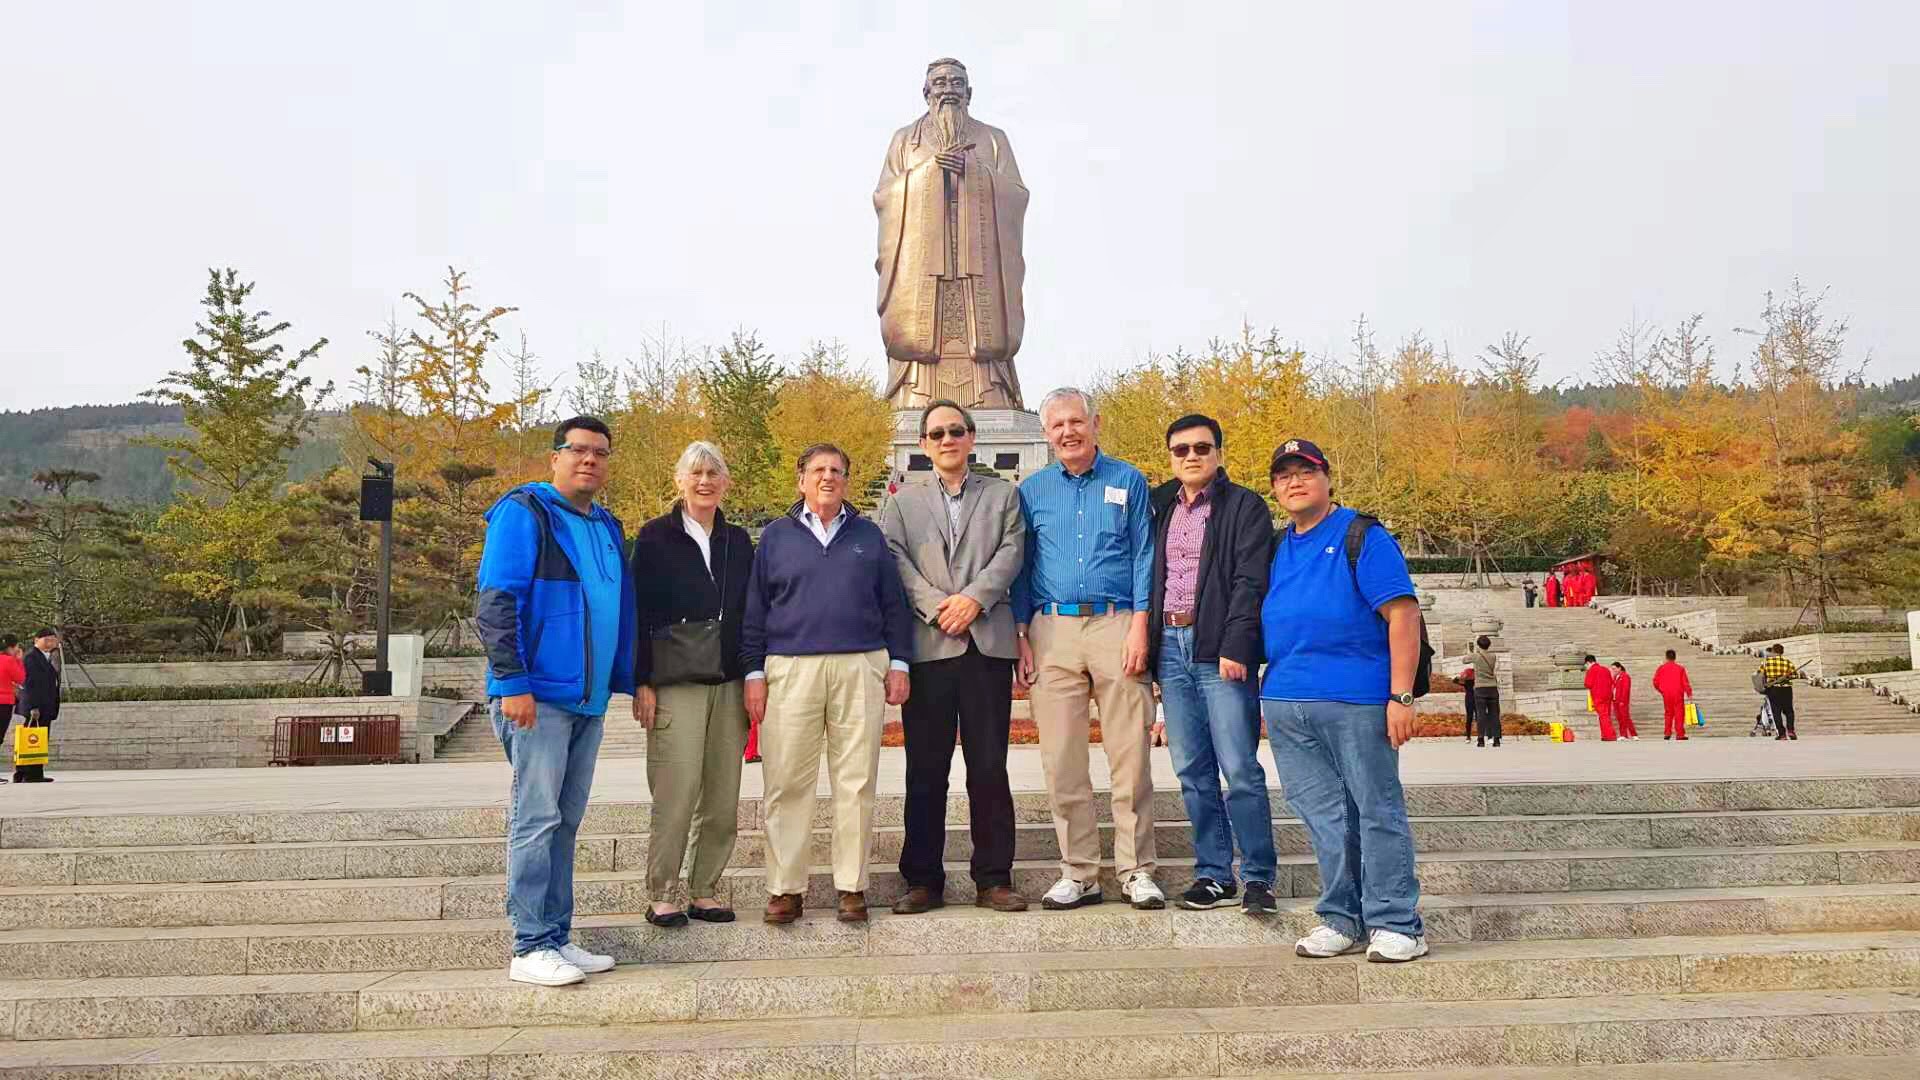  Visit to Confucious' birthplace 